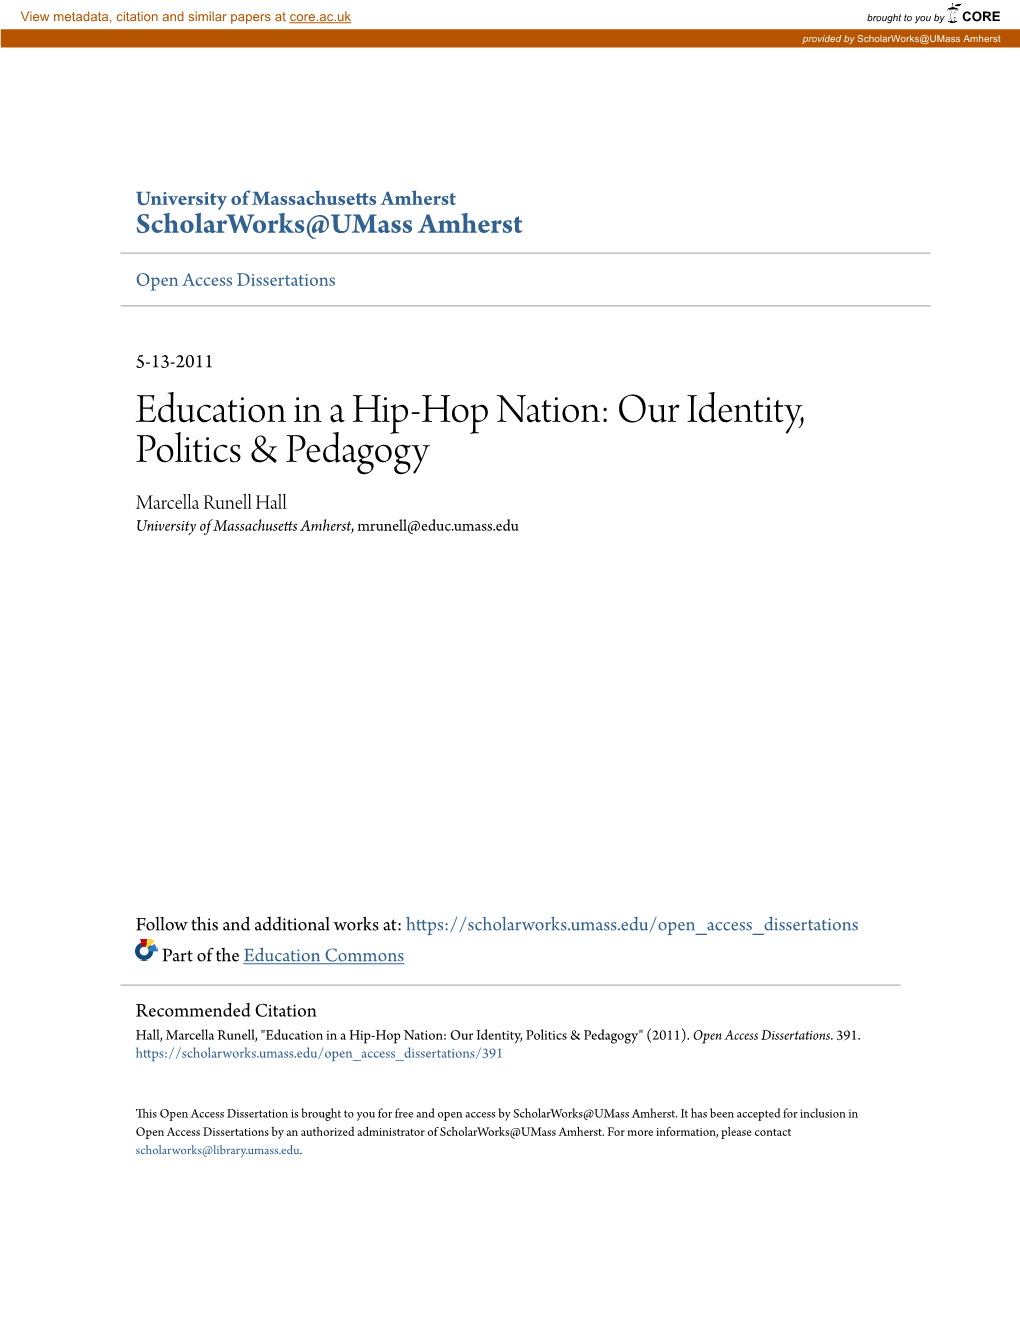 Education in a Hip-Hop Nation: Our Identity, Politics & Pedagogy